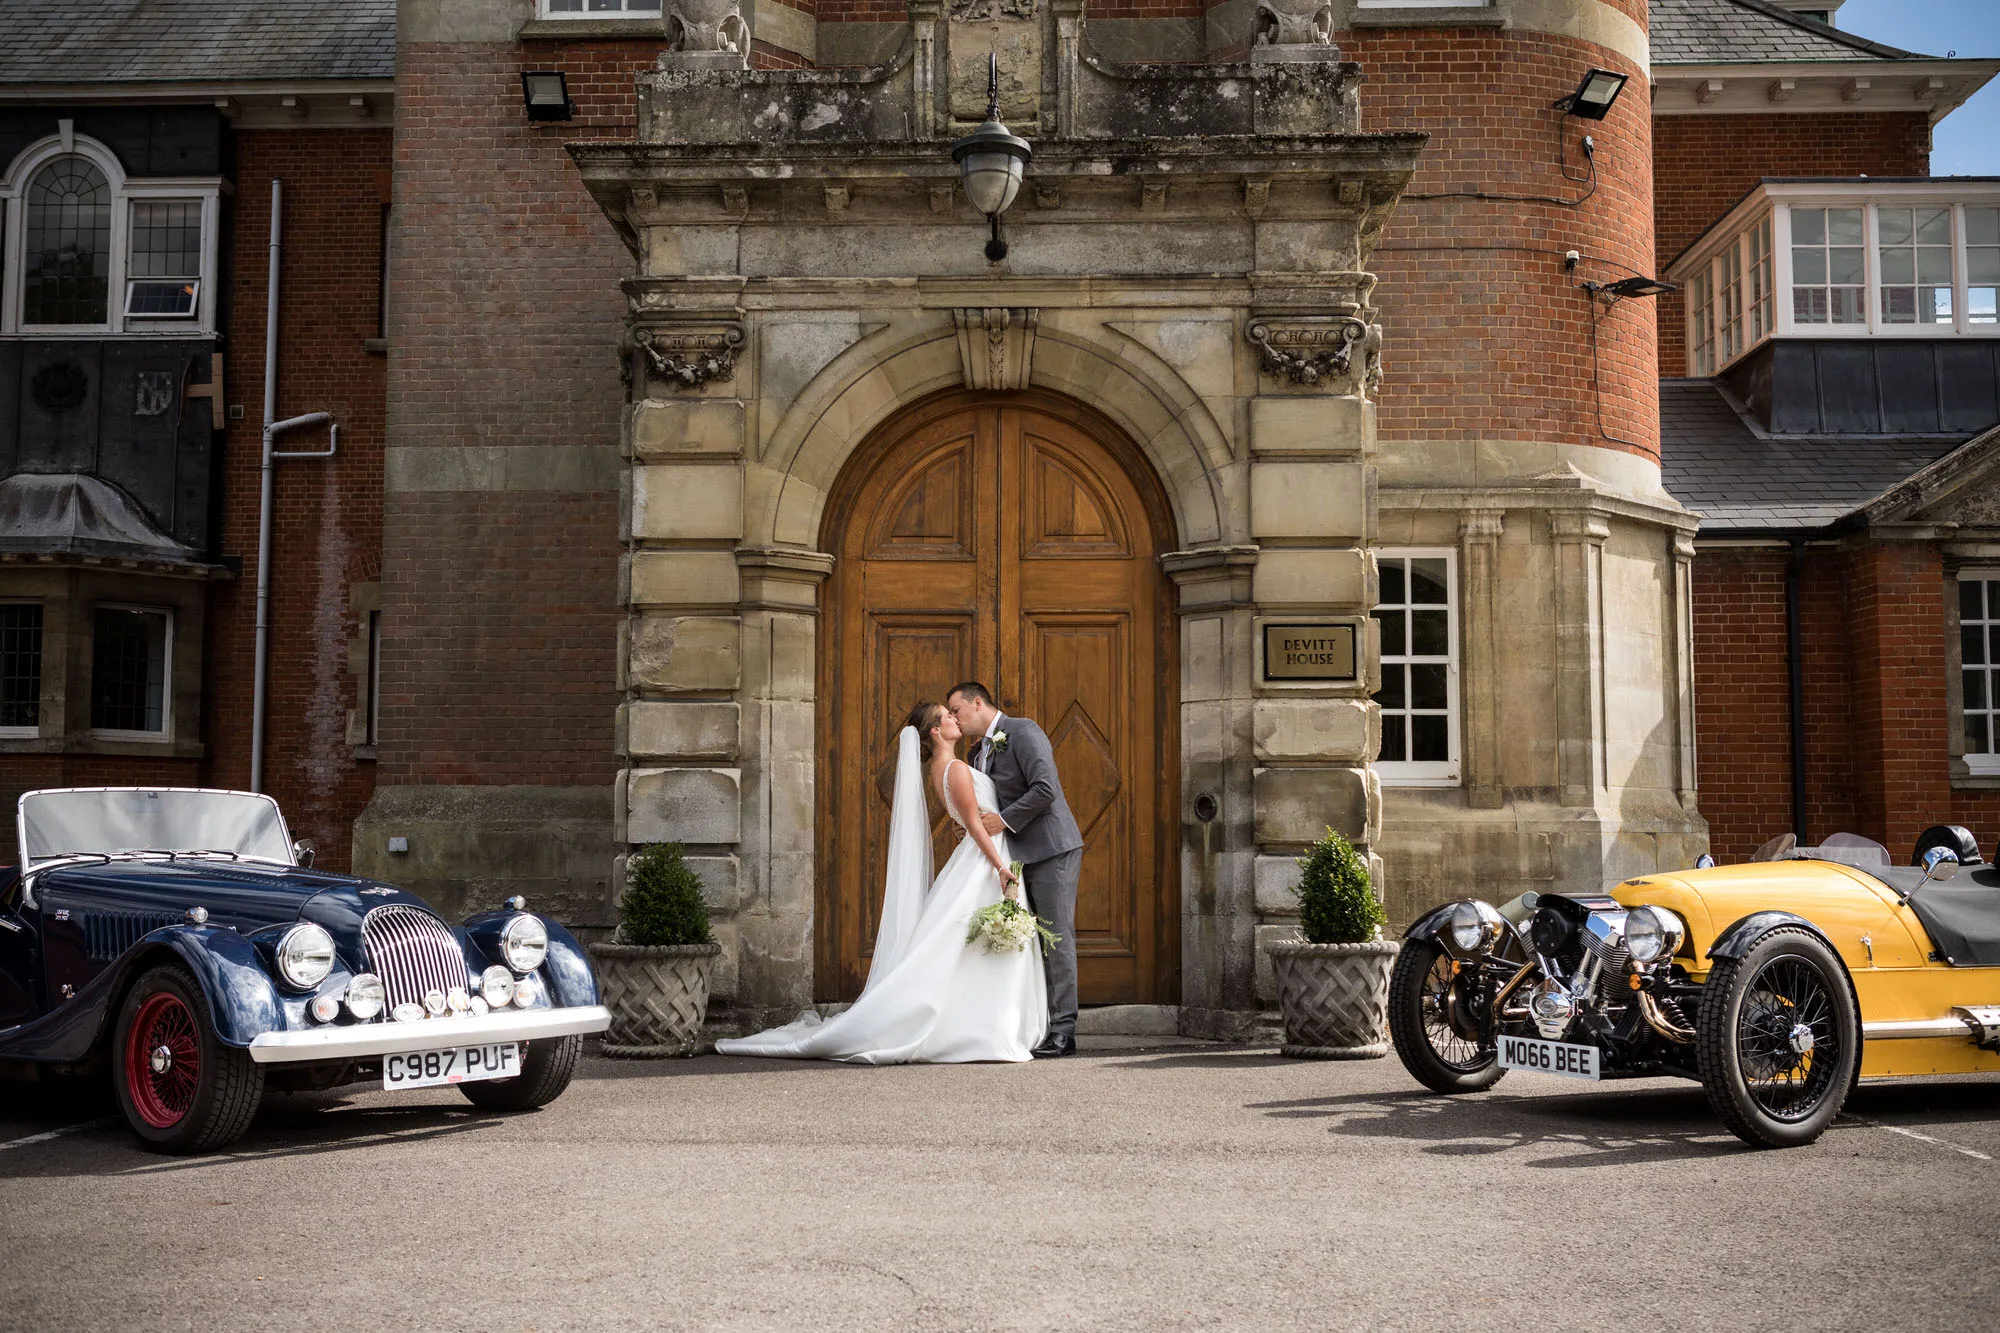 Berkshire wedding photographer - couple kiss outside Pangbourne College with classic cars on either side of the doorway used for the background.